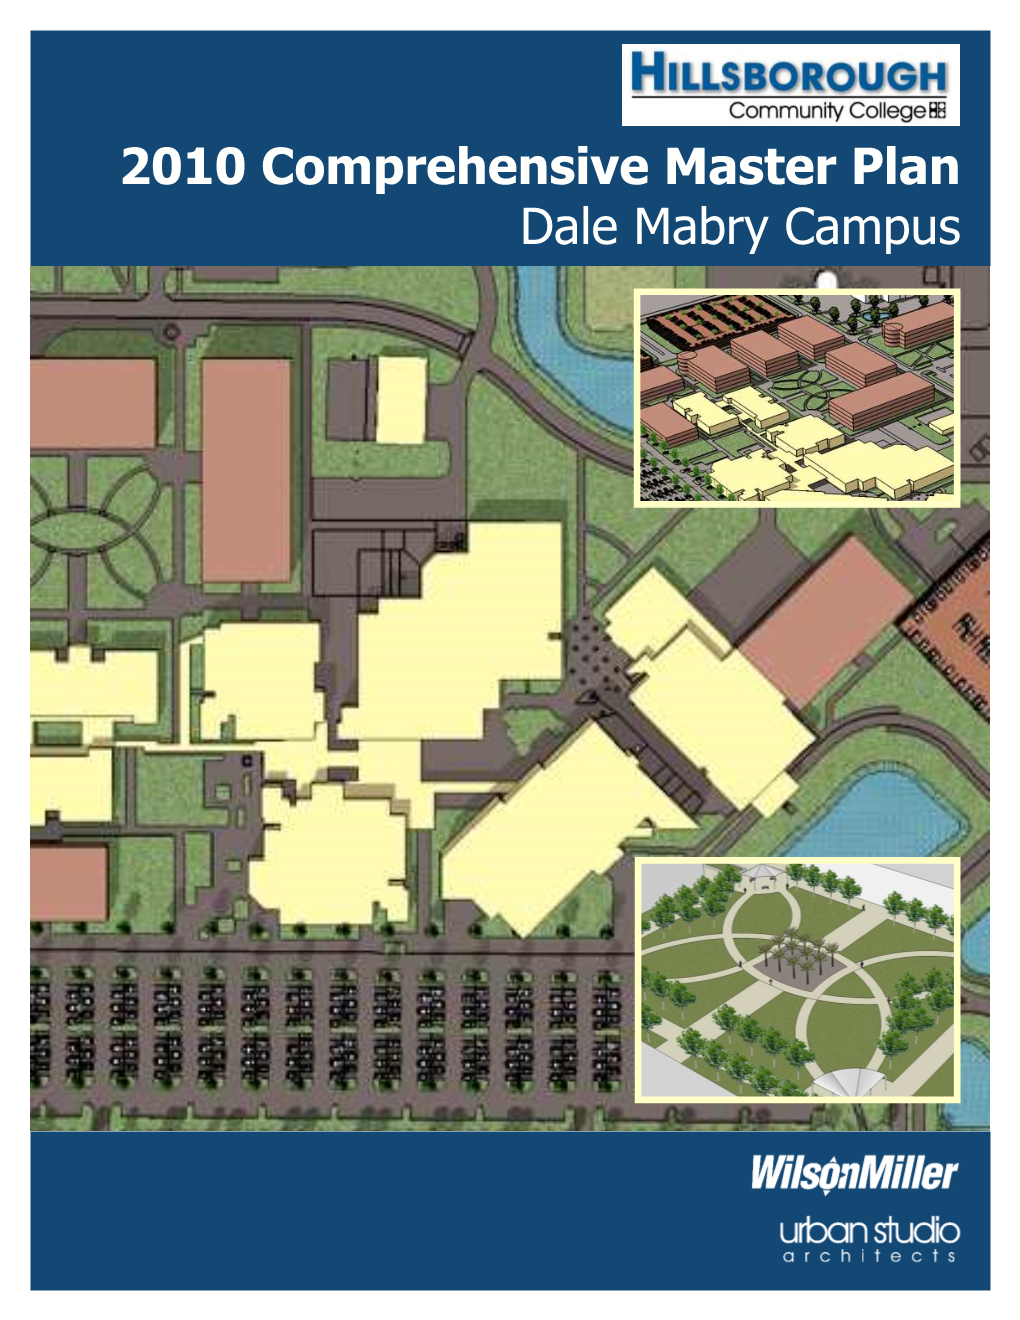 2010 Comprehensive Master Plan Dale Mabry Campus Hillsborough Community College: Dale Mabry Campus